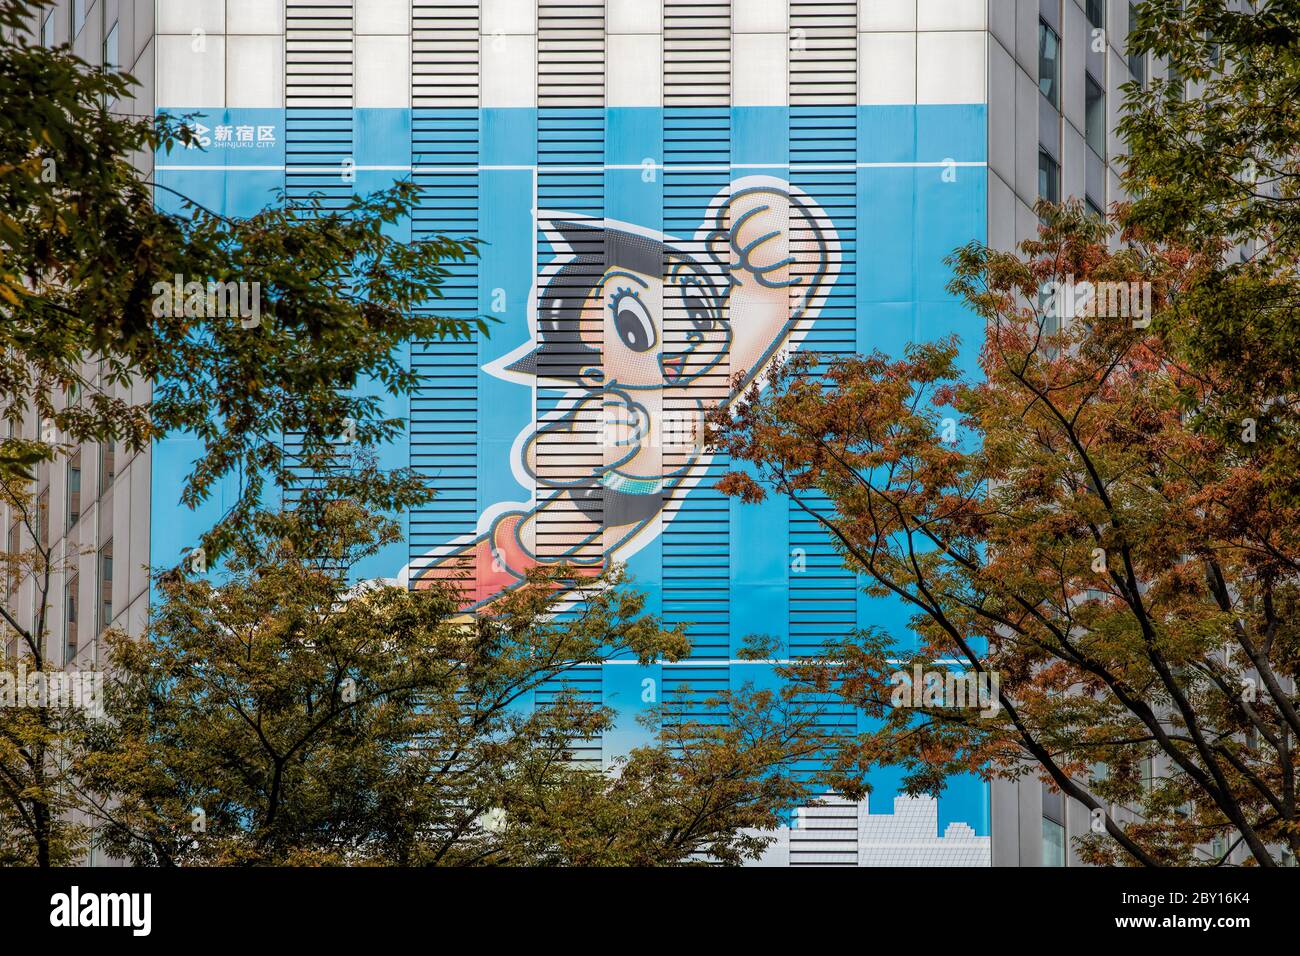 Tokyo Japan October 31st 2016 : Flying boy cartoon advertisement on the exterior of a building in the Shinjuku district of Tokyo, Japan Stock Photo